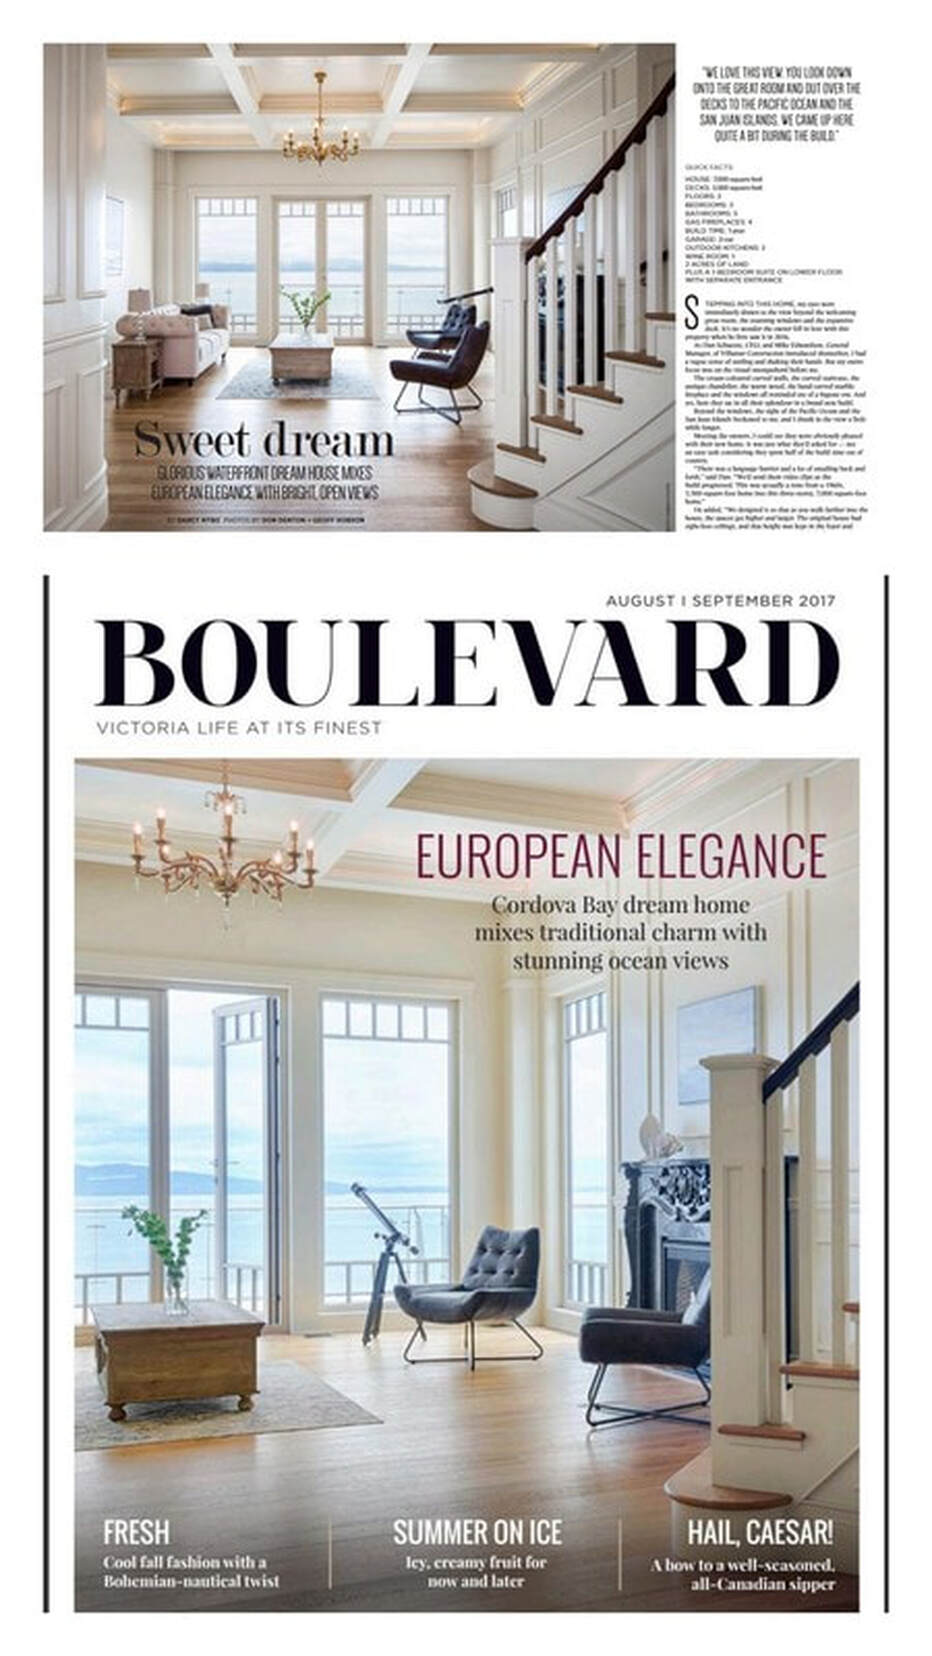 Front Page Feature in ‘Boulevard Magazine’